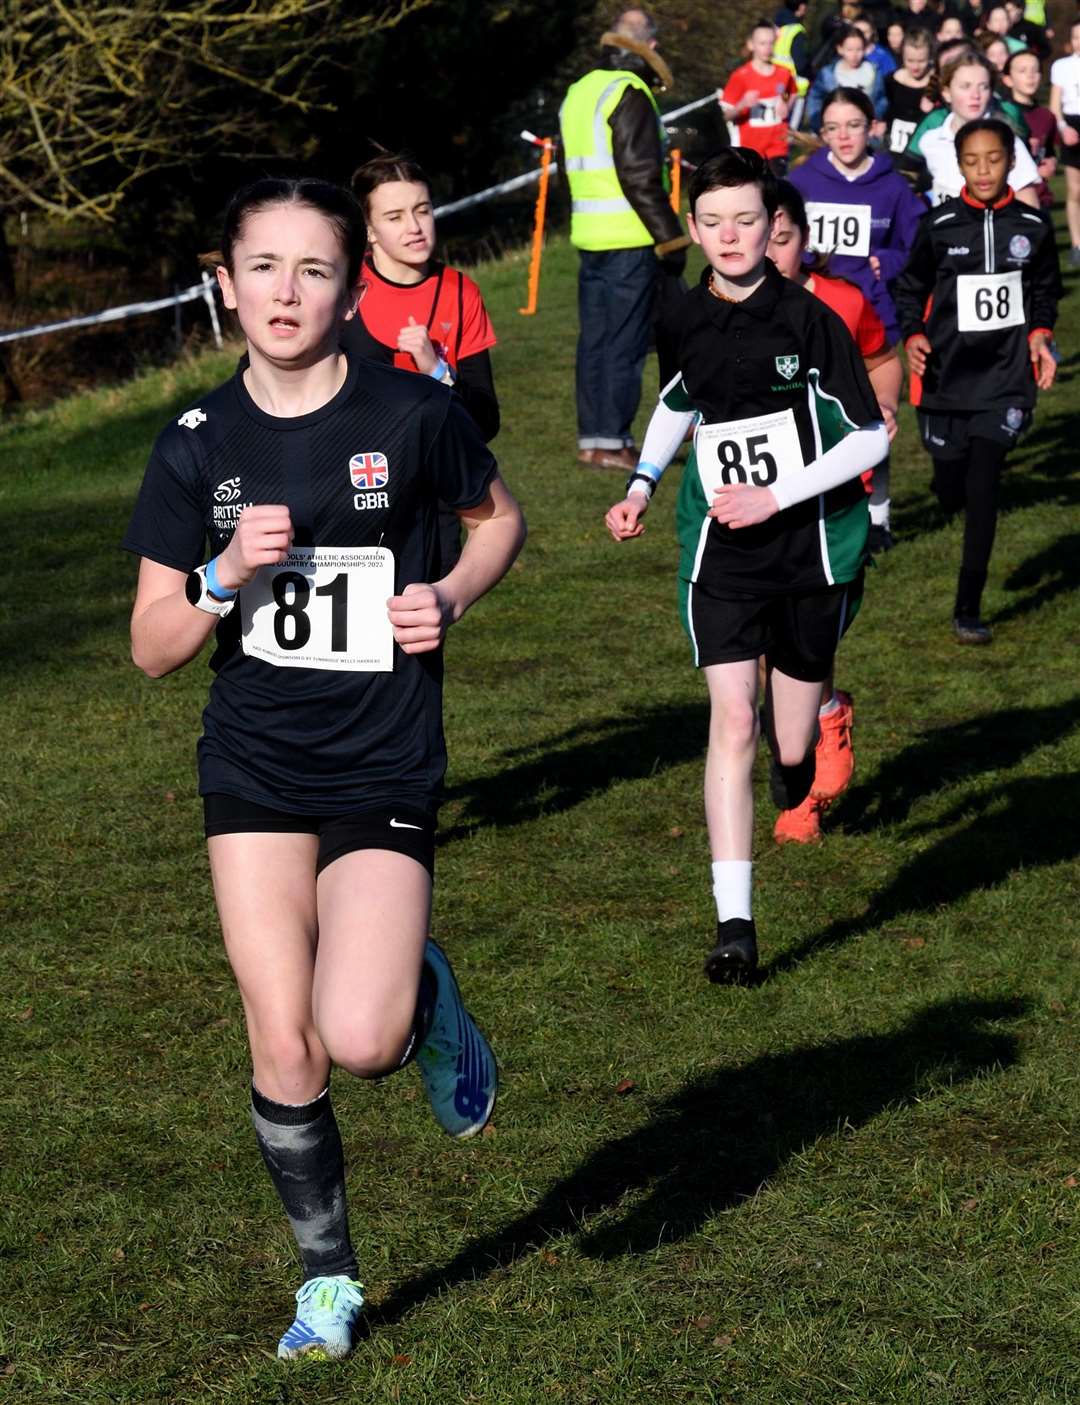 No.81, Ava-Mai Malone, and No.85, Ettie Winser, both racing for Maidstone in the Year 7 girls' event. Picture: Simon Hildrew (62005821)